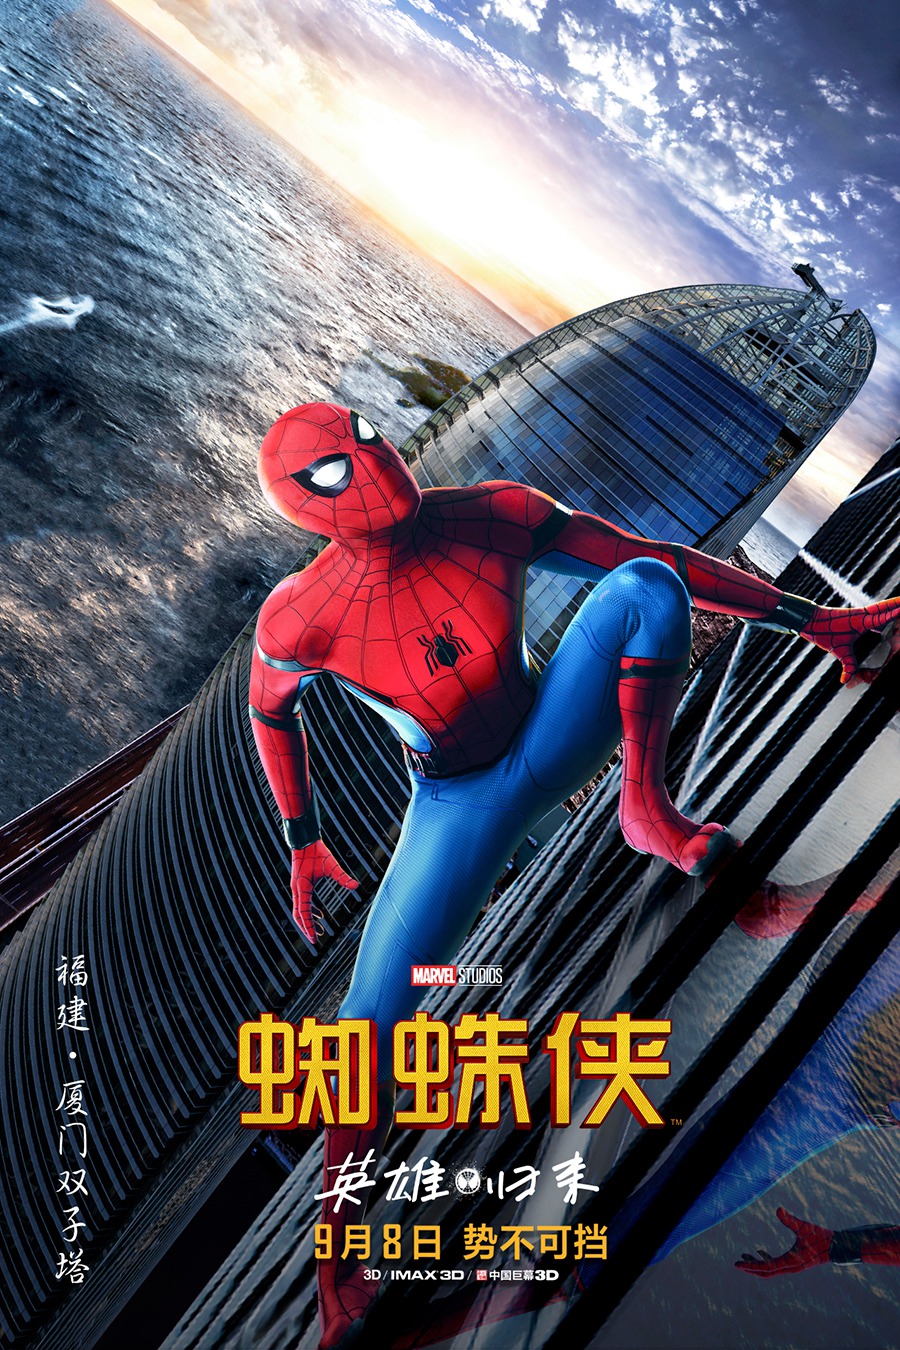 Extra Large Movie Poster Image for Spider-Man: Homecoming (#20 of 56)